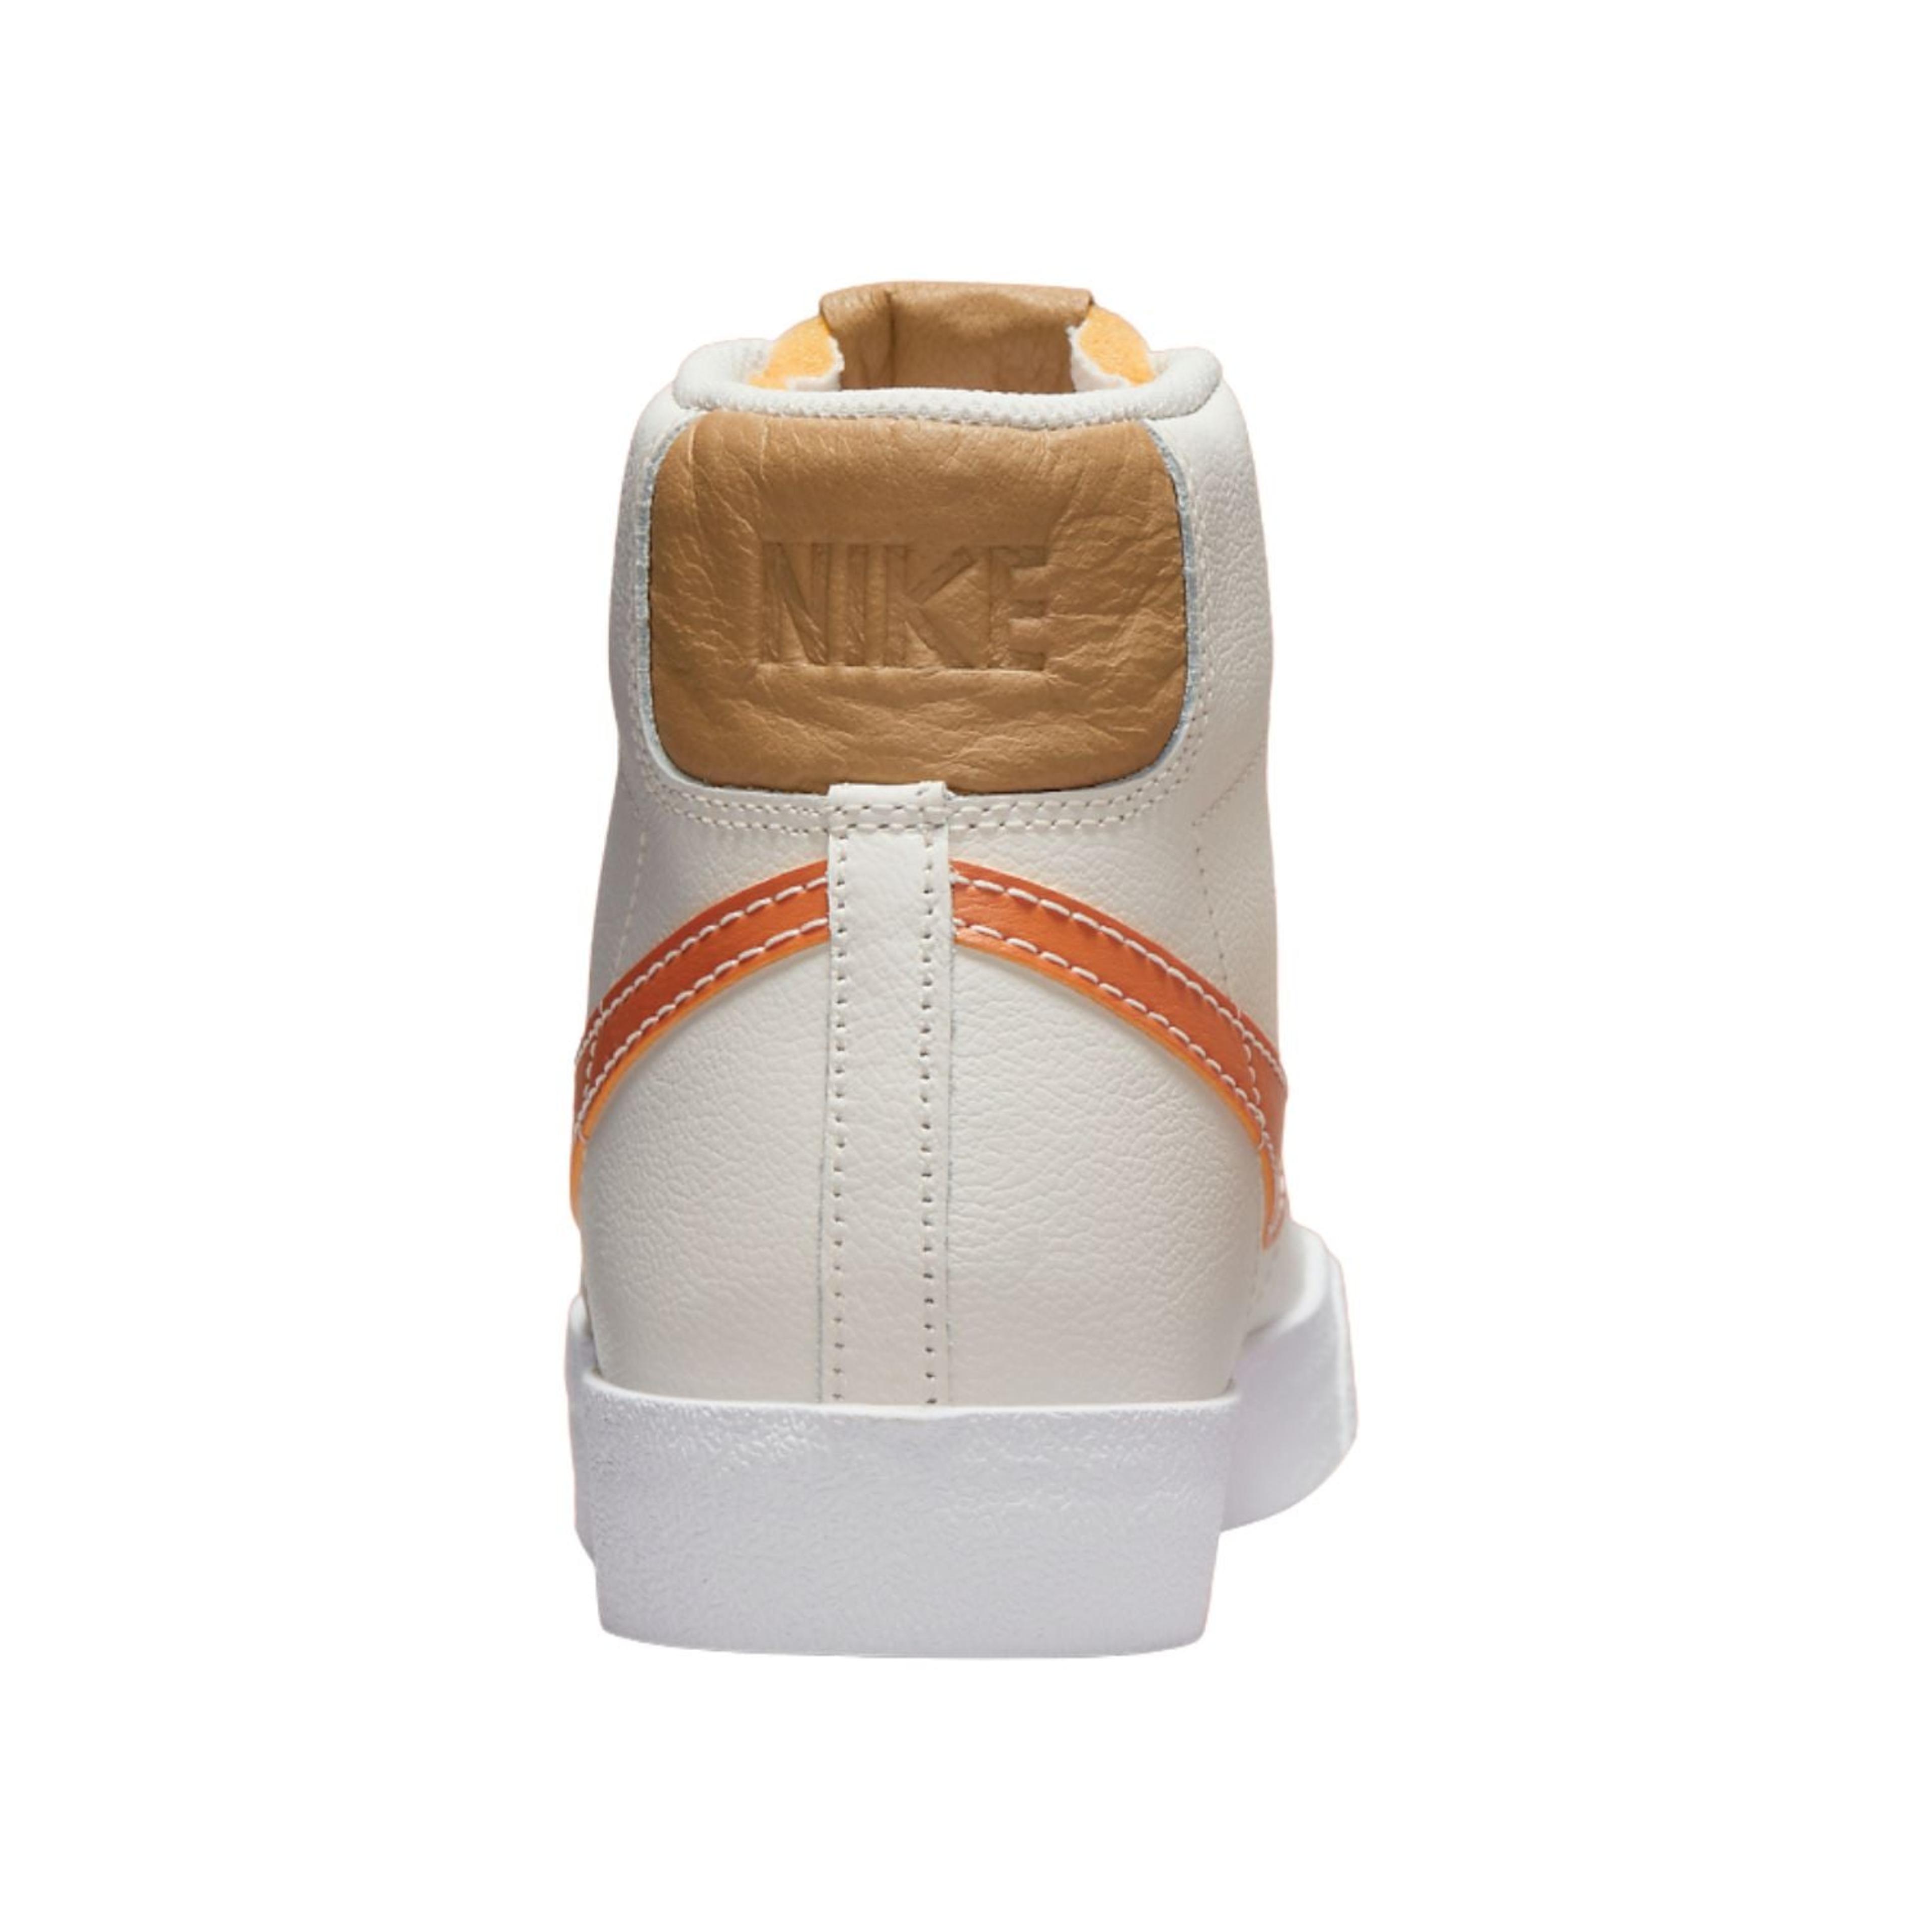 Alternate View 1 of Nike Blazer Mid '77 EMB Inspected By Swoosh Hot Curry